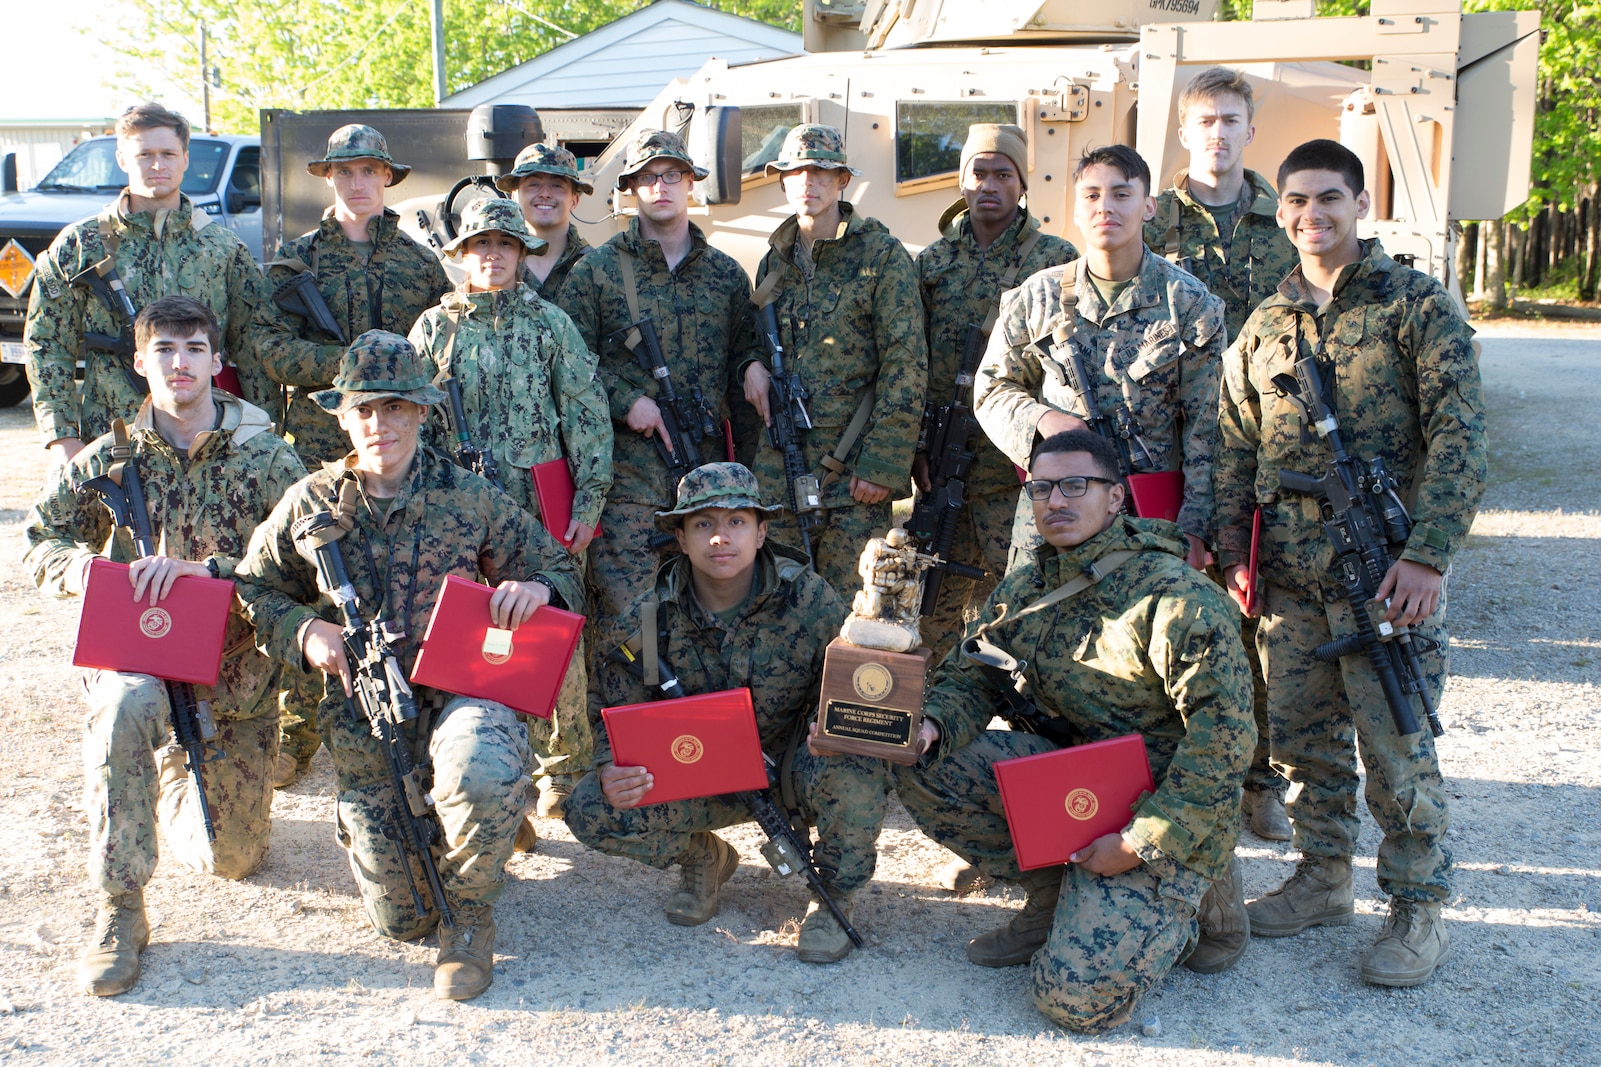 MCSFR Squad Competition: The winning squad from Marine Corps Security Force Battalion - Bangor, Washington